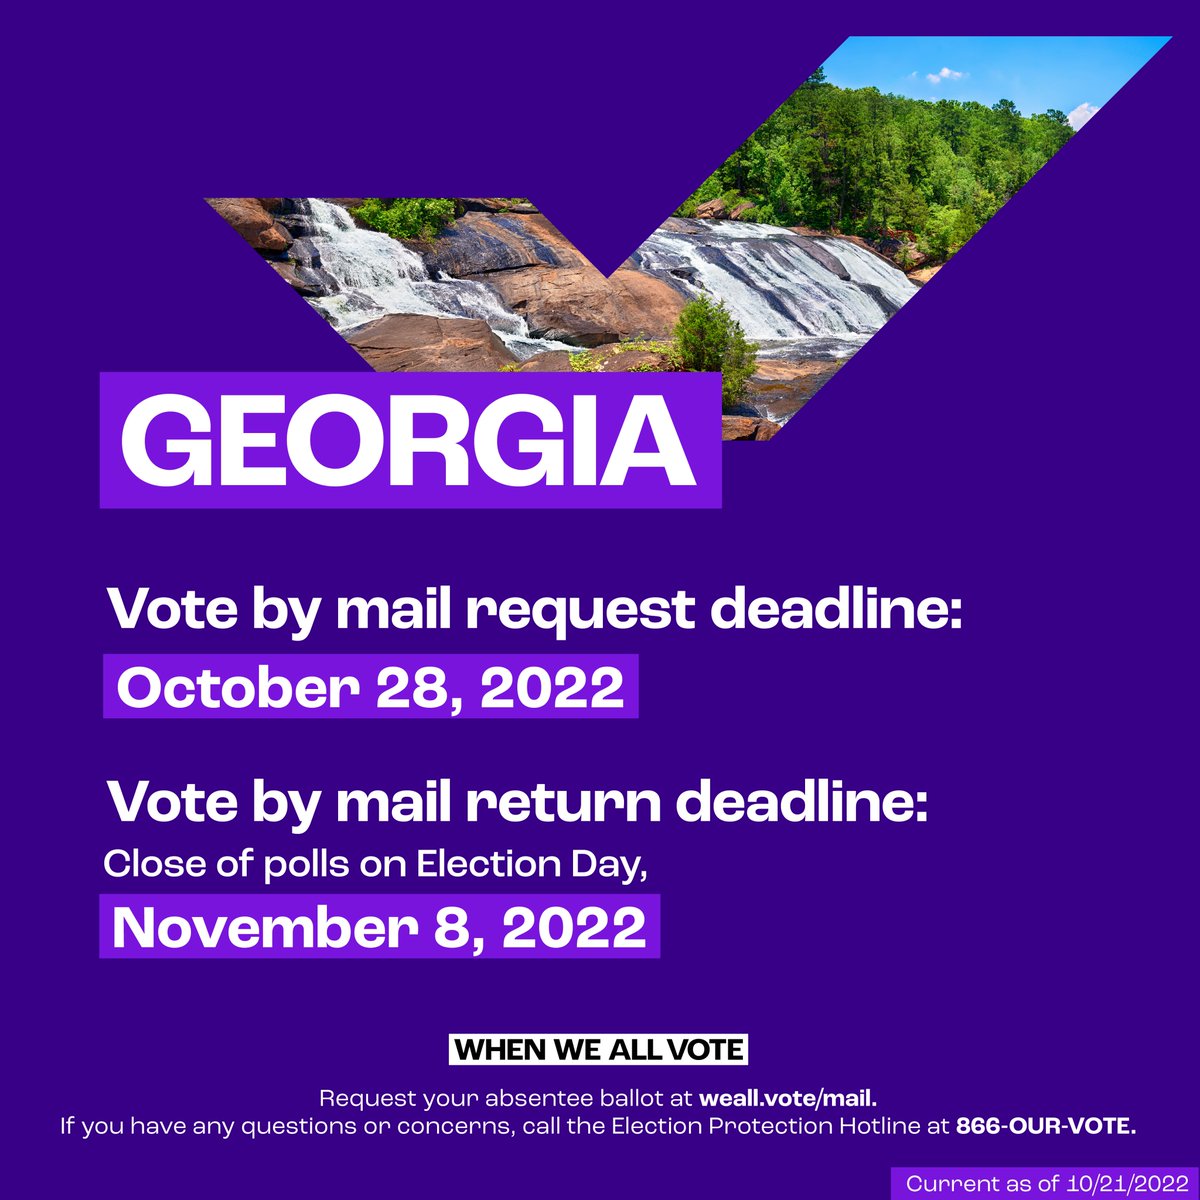 GEORGIA — your vote by mail request deadline is coming up! Request your mail ballot by October 28 at weall.vote/mail. Remember, you must return your ballot by close of polls on Election Day — November 8. 𝘉𝘶𝘵 𝘸𝘩𝘺 𝘸𝘢𝘪𝘵? Return your ballot as soon as you can.